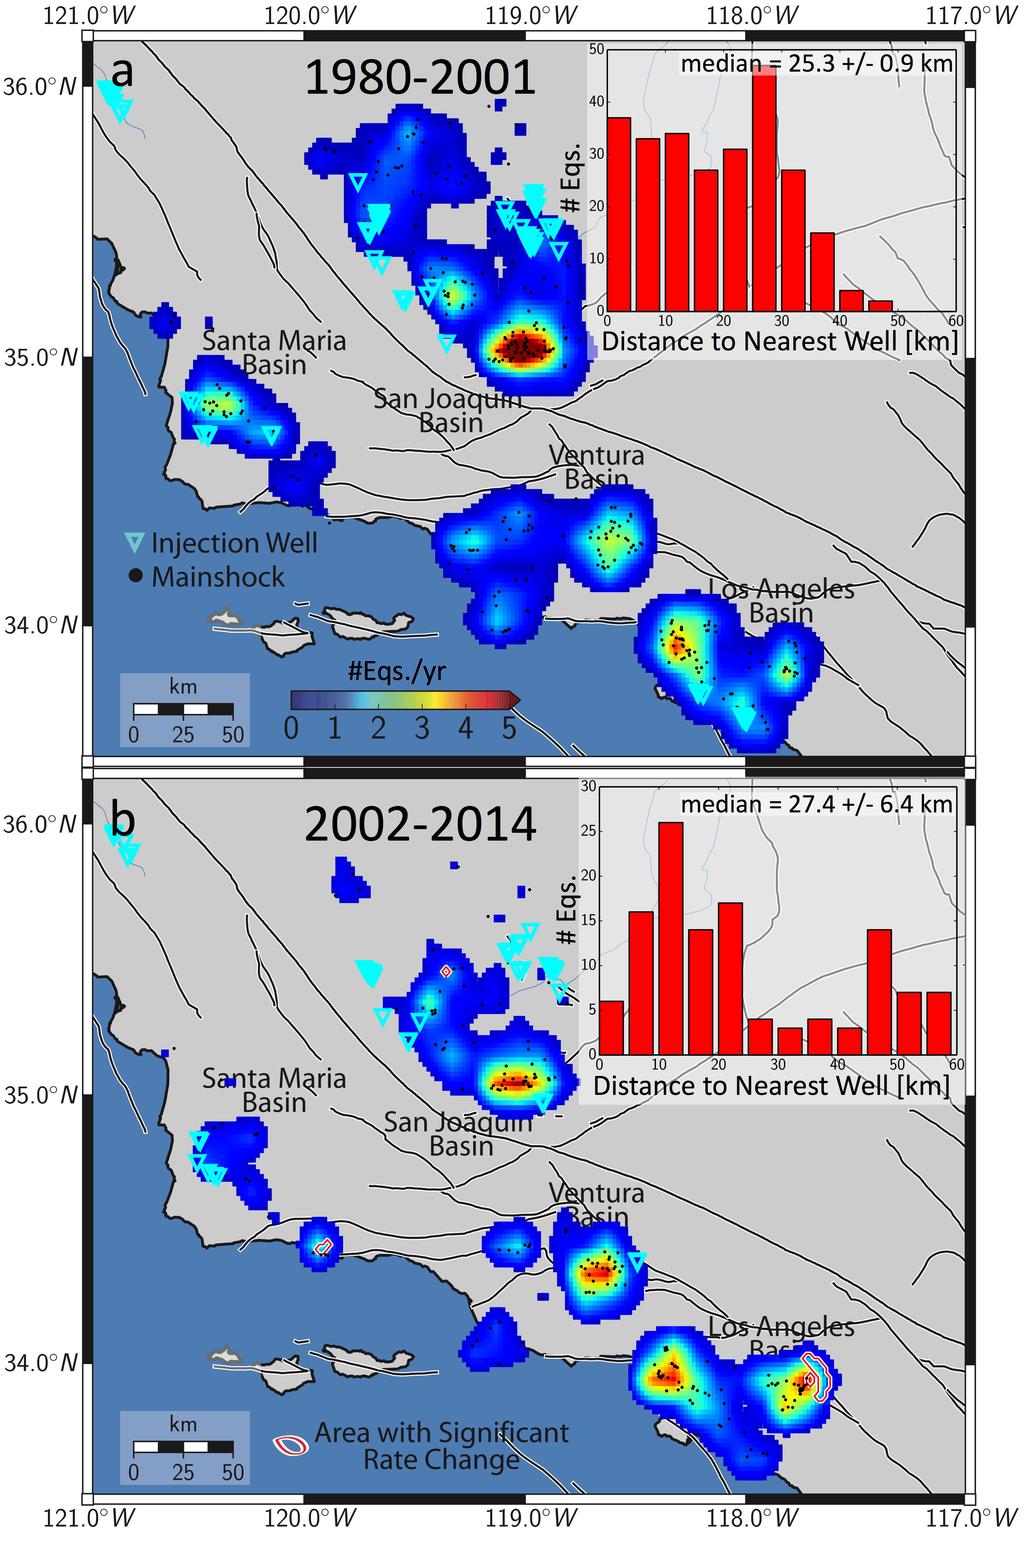 348 349 350 351 352 353 Figure 4: Smoothed, spatial variation in background seismicity rates in CA basins between 1980-2001 (a) and 2002-2014 (b).